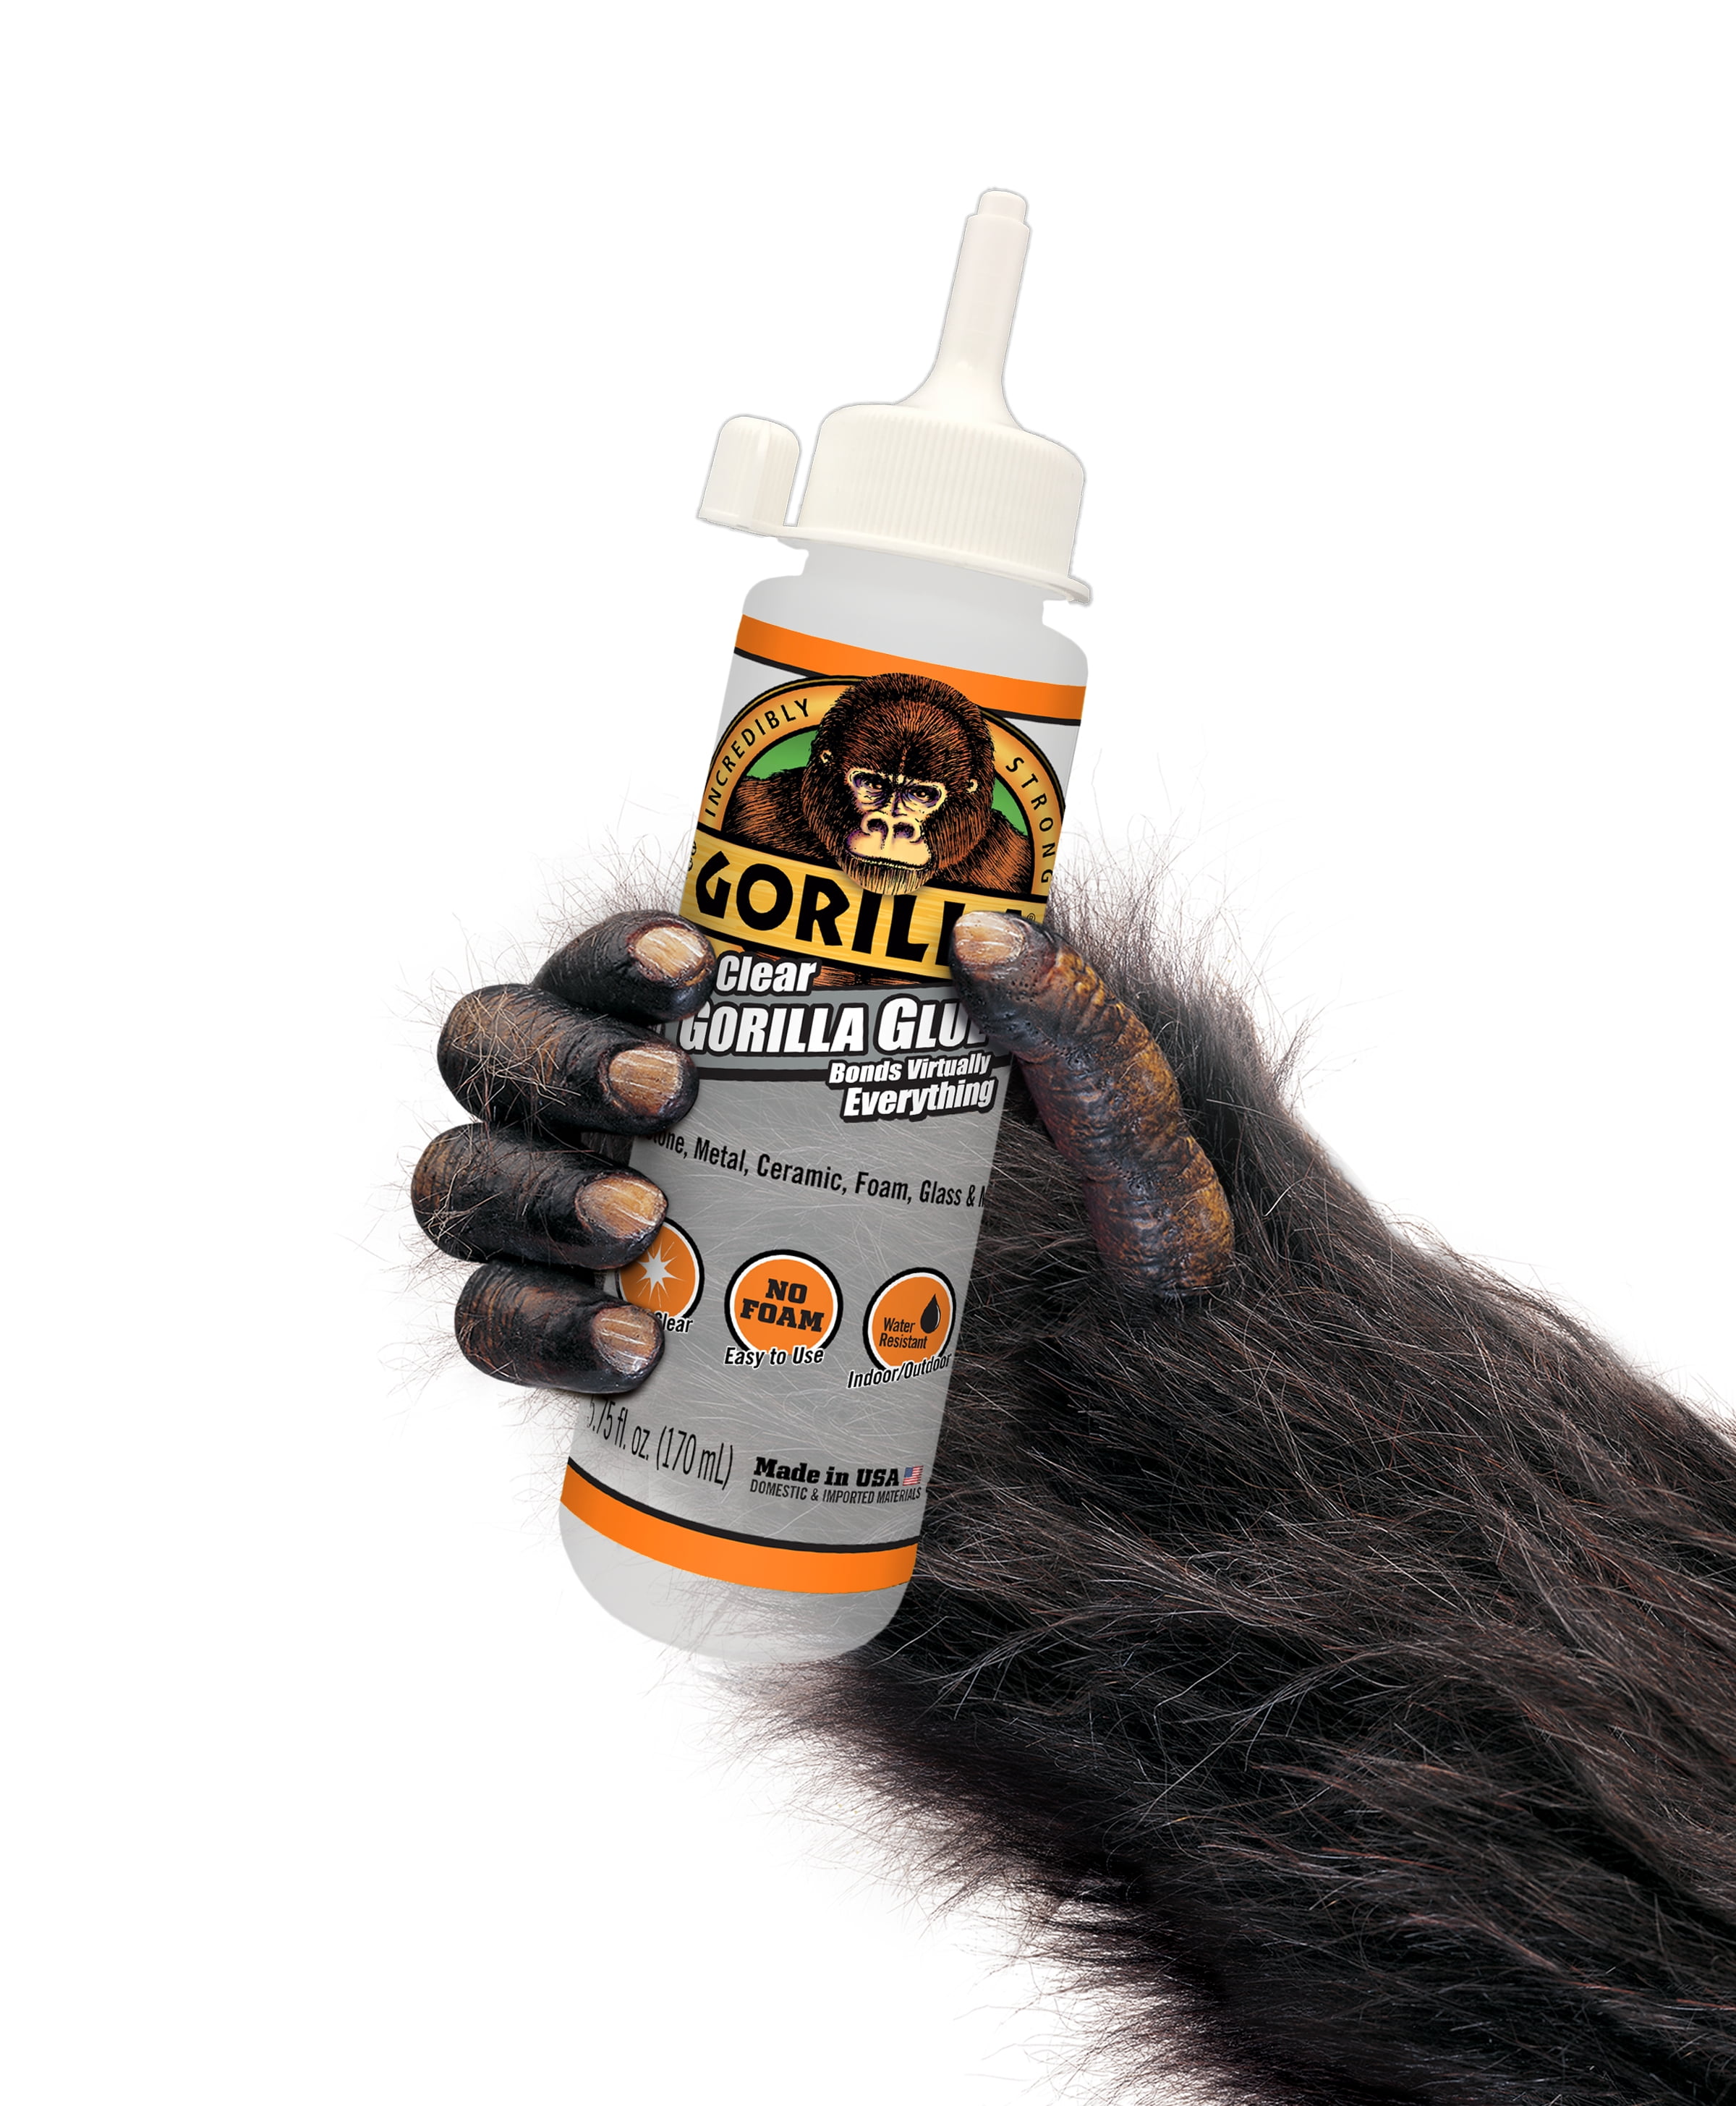 Gorilla Clear Glue, Non-Foaming and Water Resistant Glue, Clear, 1.75 ounce  Bottle by GOSO Direct